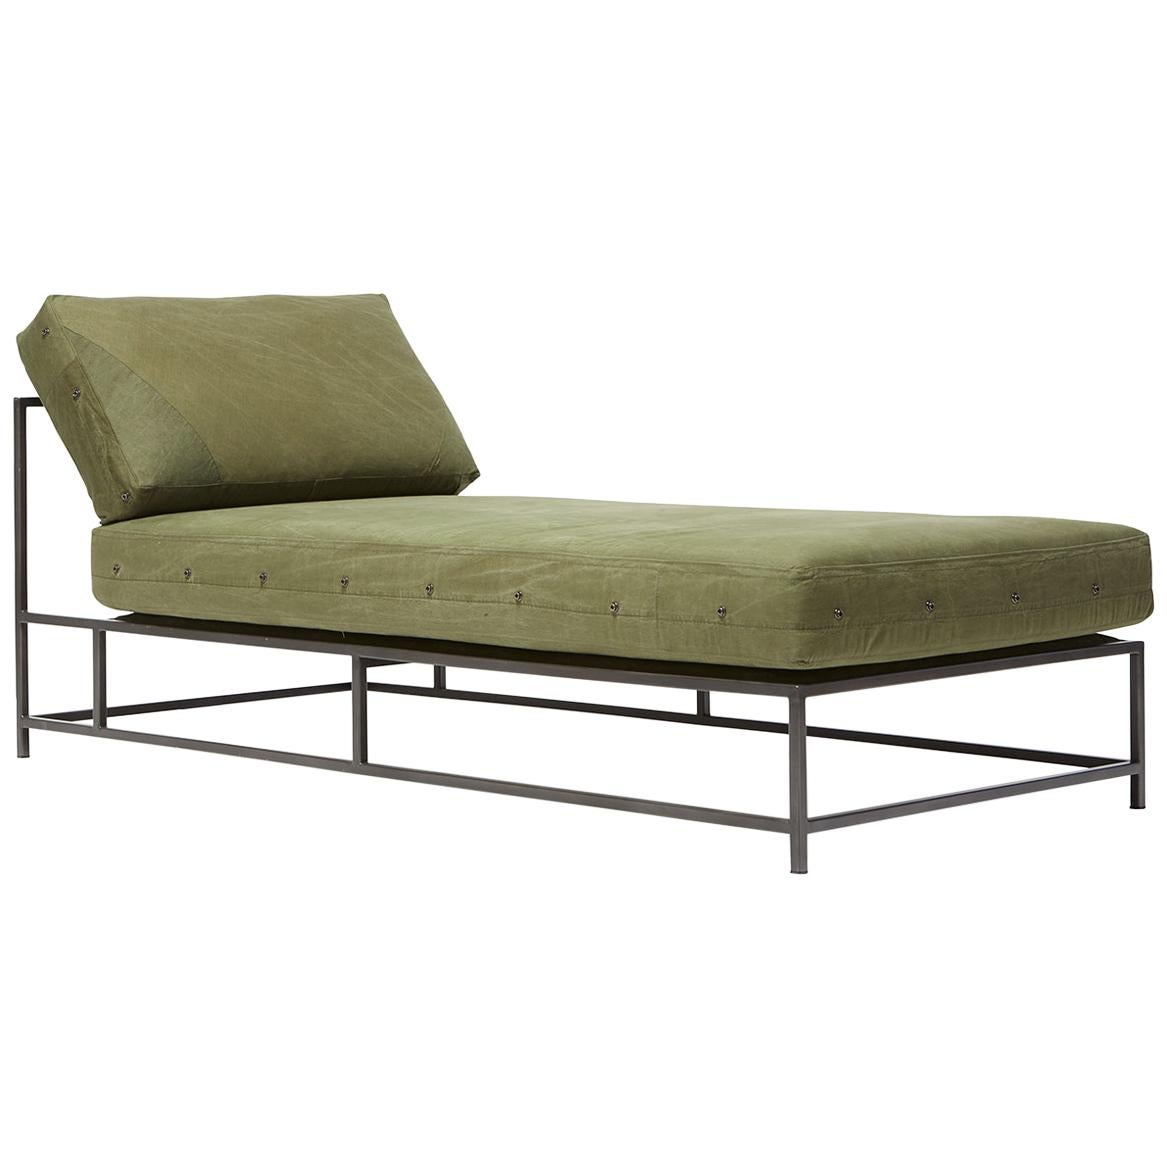 Vintage Military Canvas and Blackened Steel Chaise Lounge For Sale